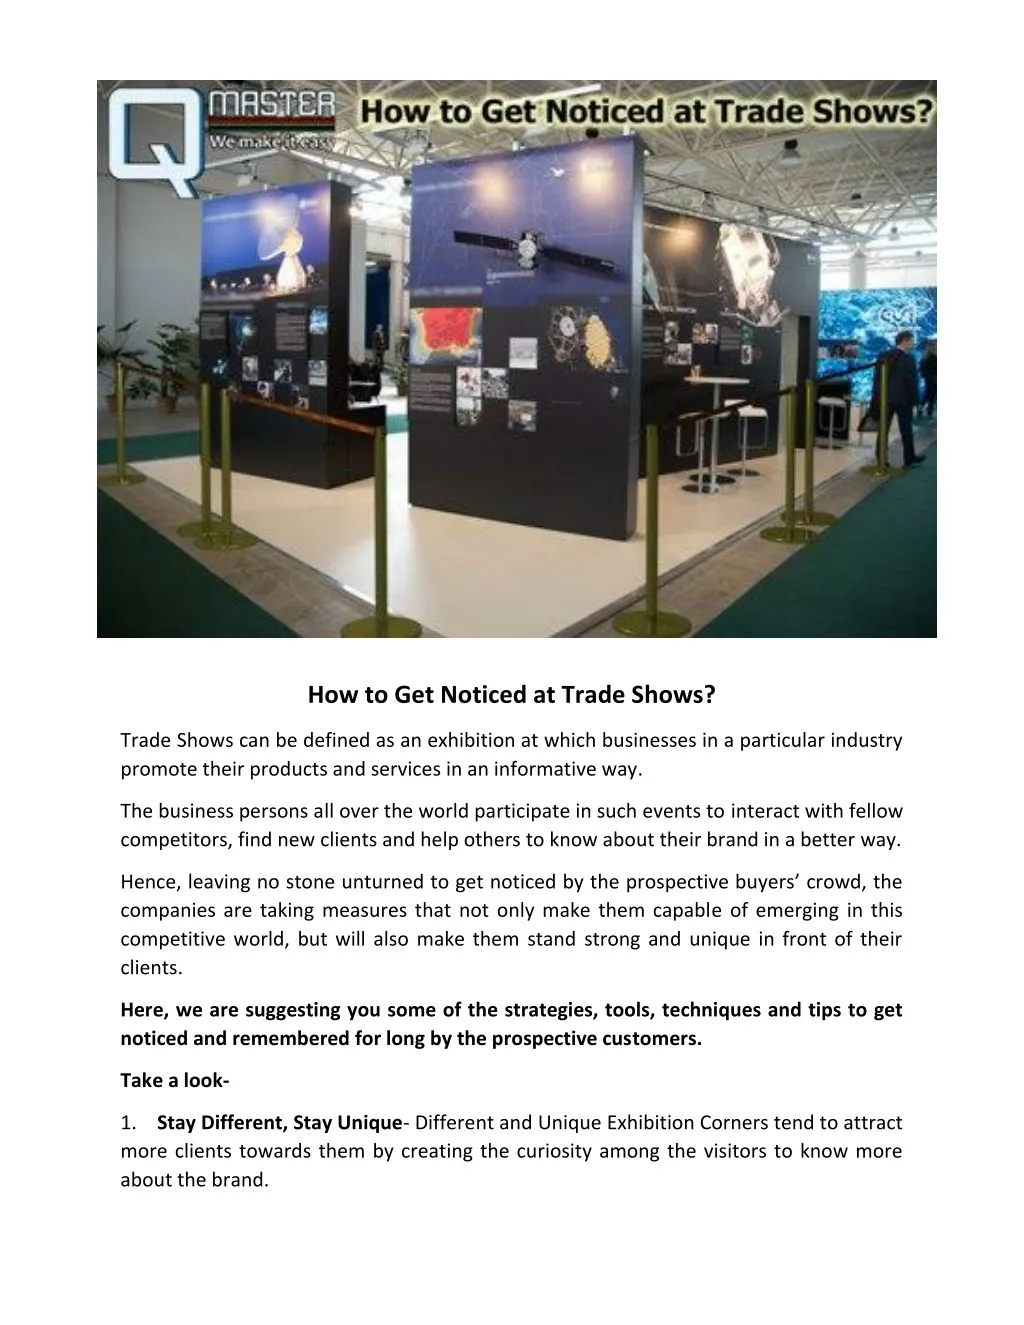 how to get noticed at trade shows